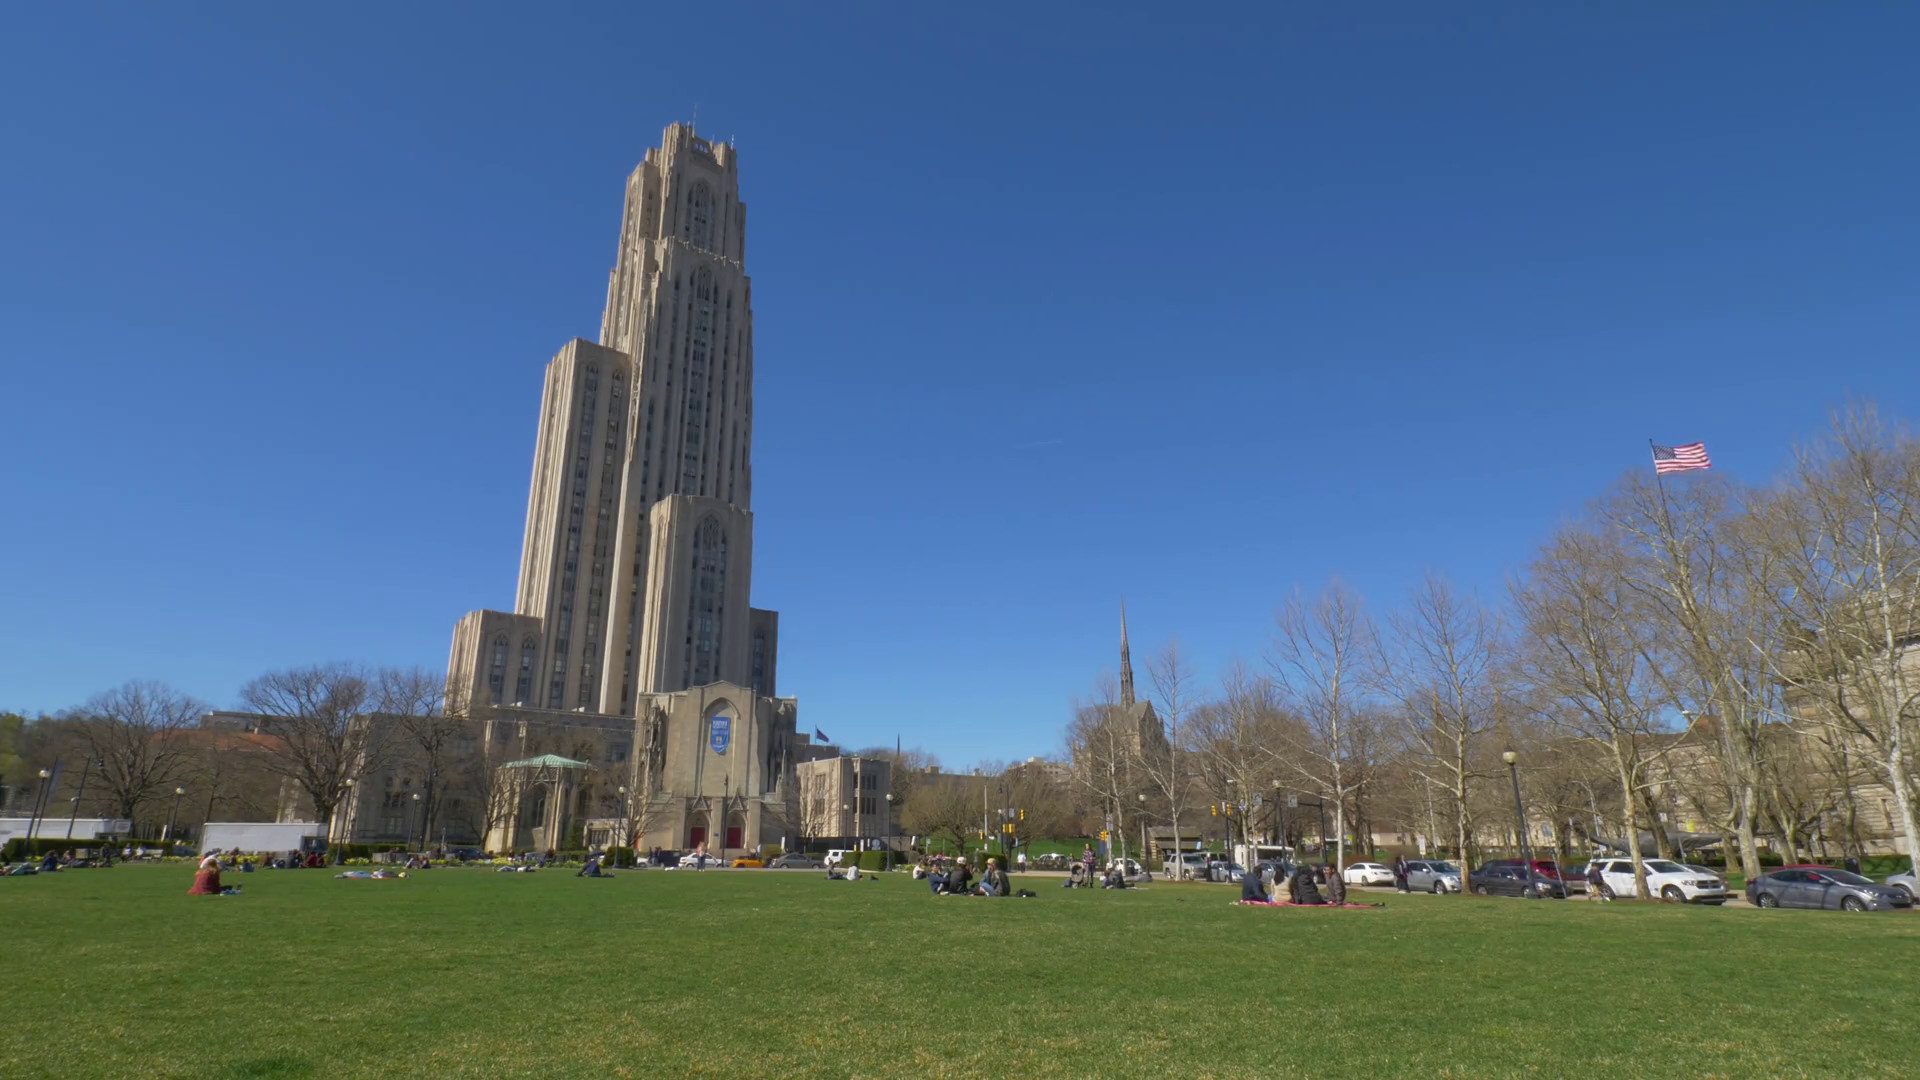 1920x1080 PITTSBURGH - Circa April, 2017 - A daytime establishing shot of the  Cathedral of Learning on Pitt's campus on a sunny early Spring day.